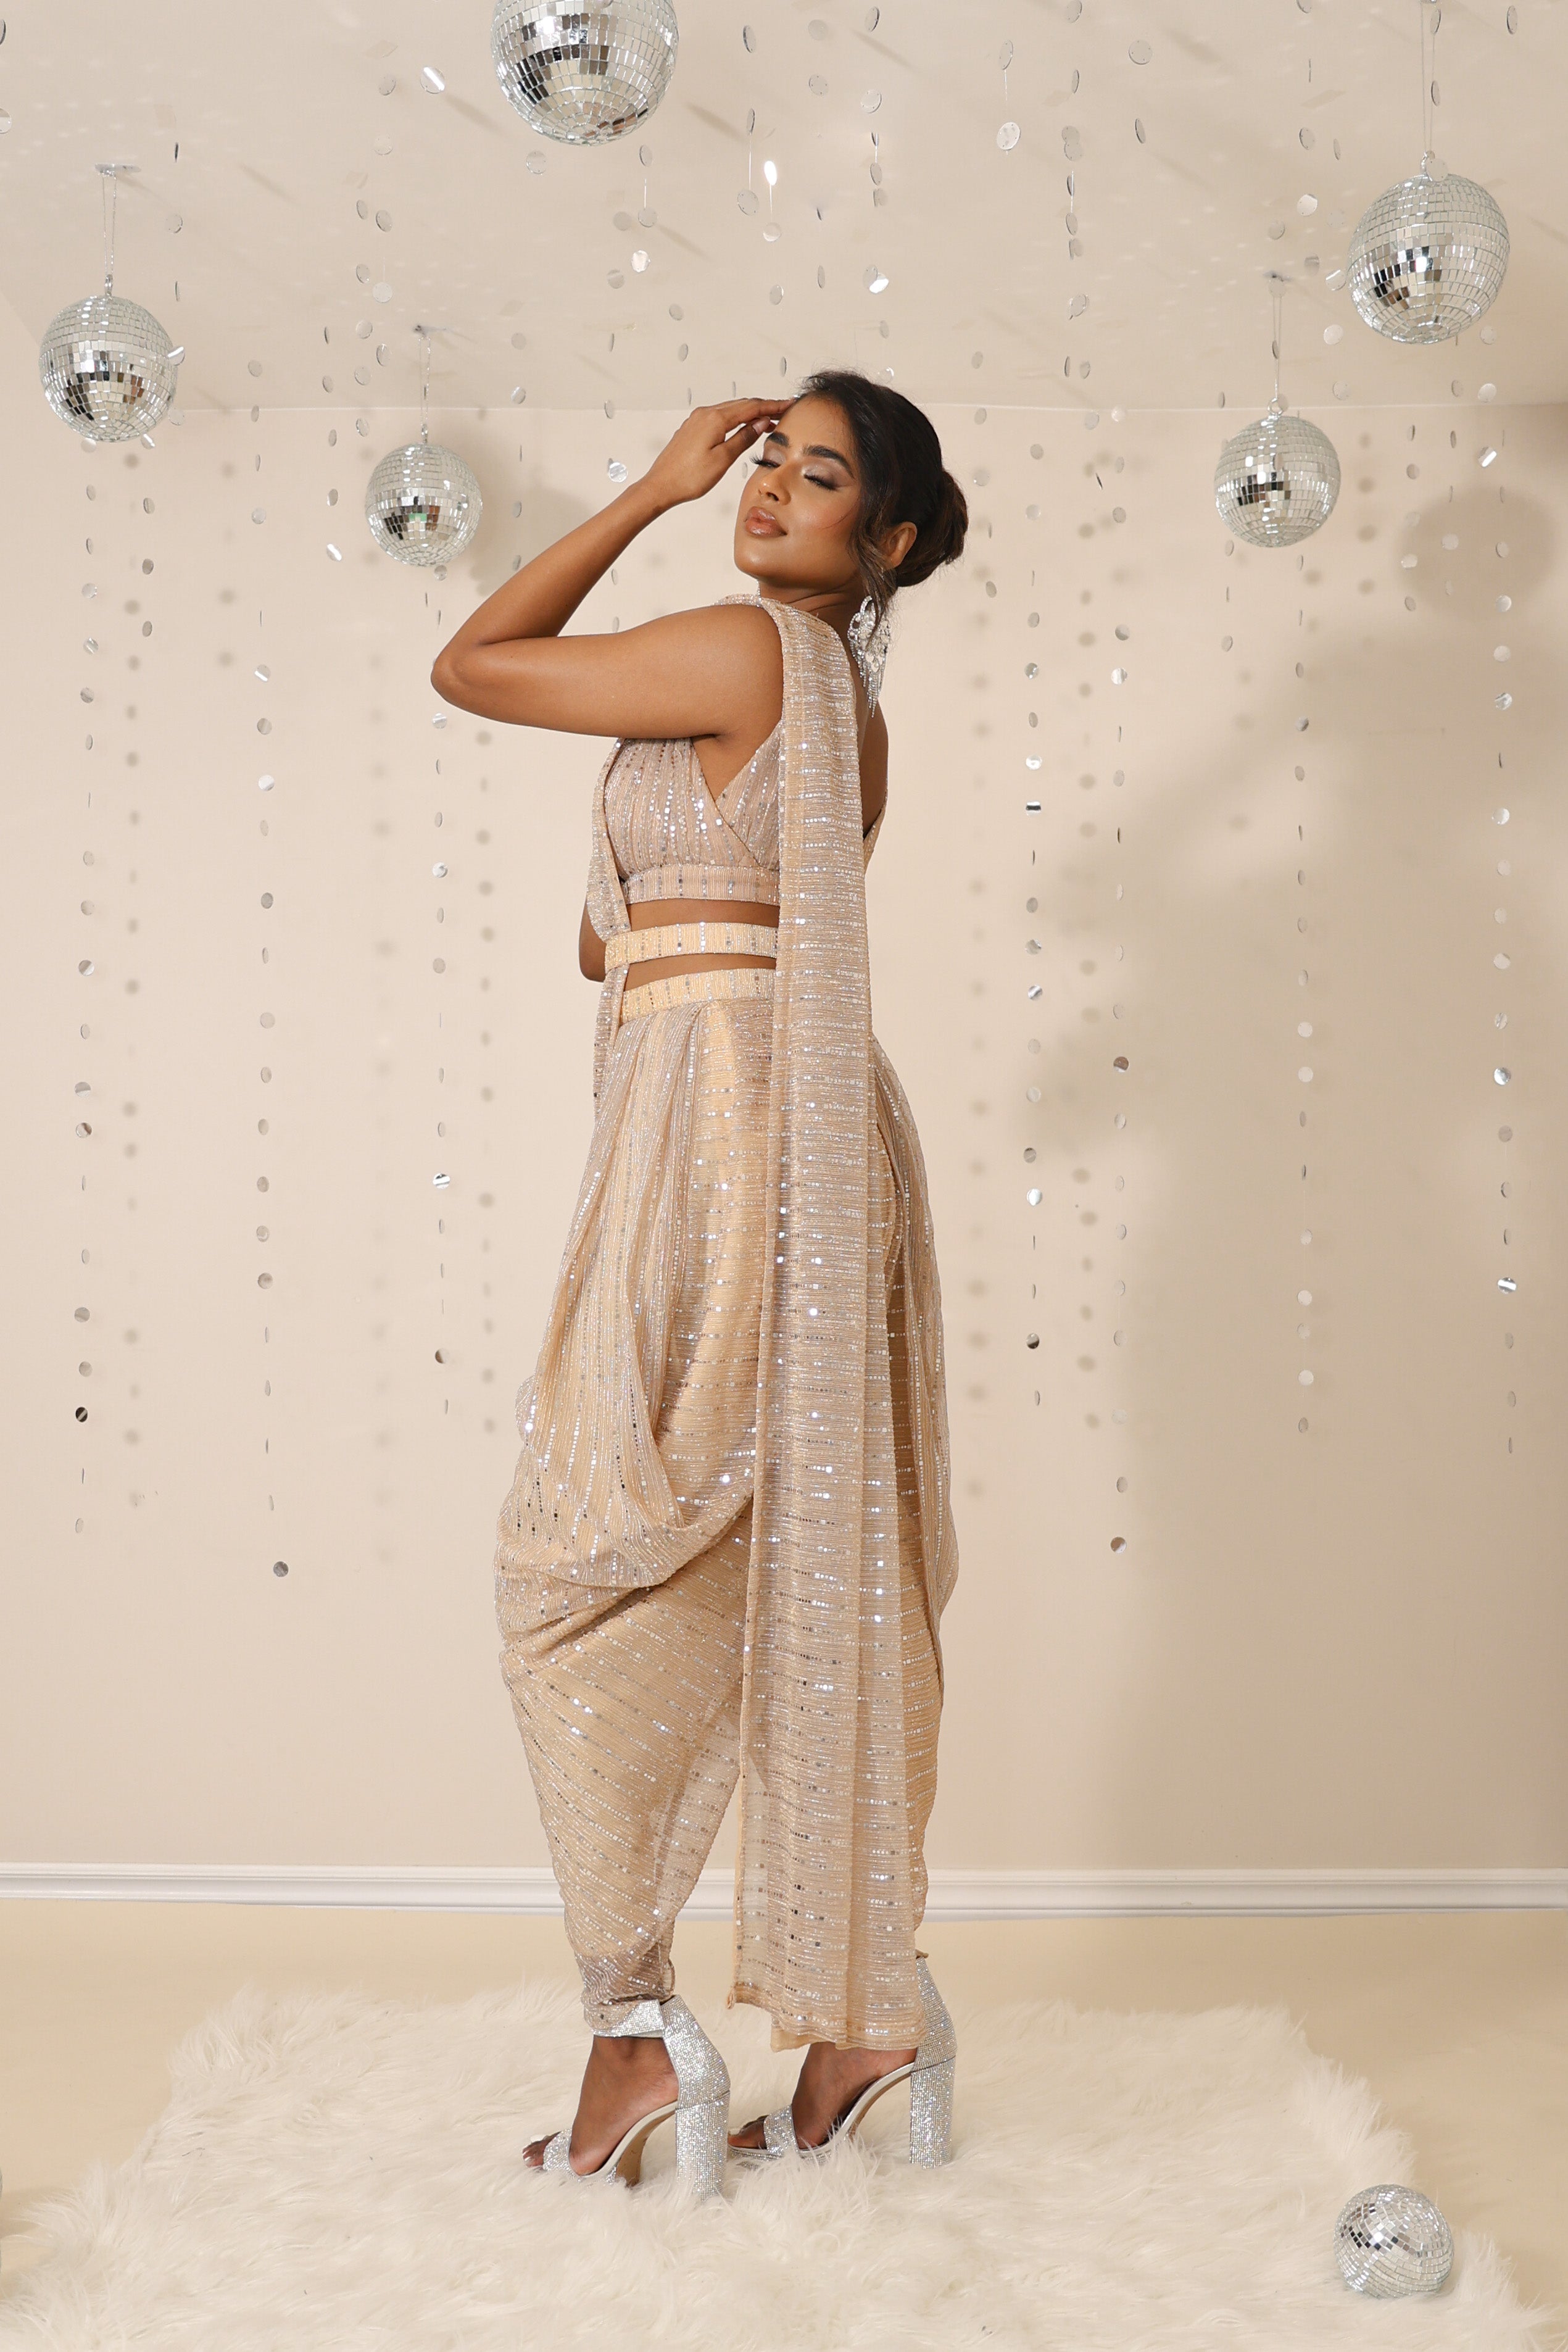 Our Best Selling Saree Silhouettes–